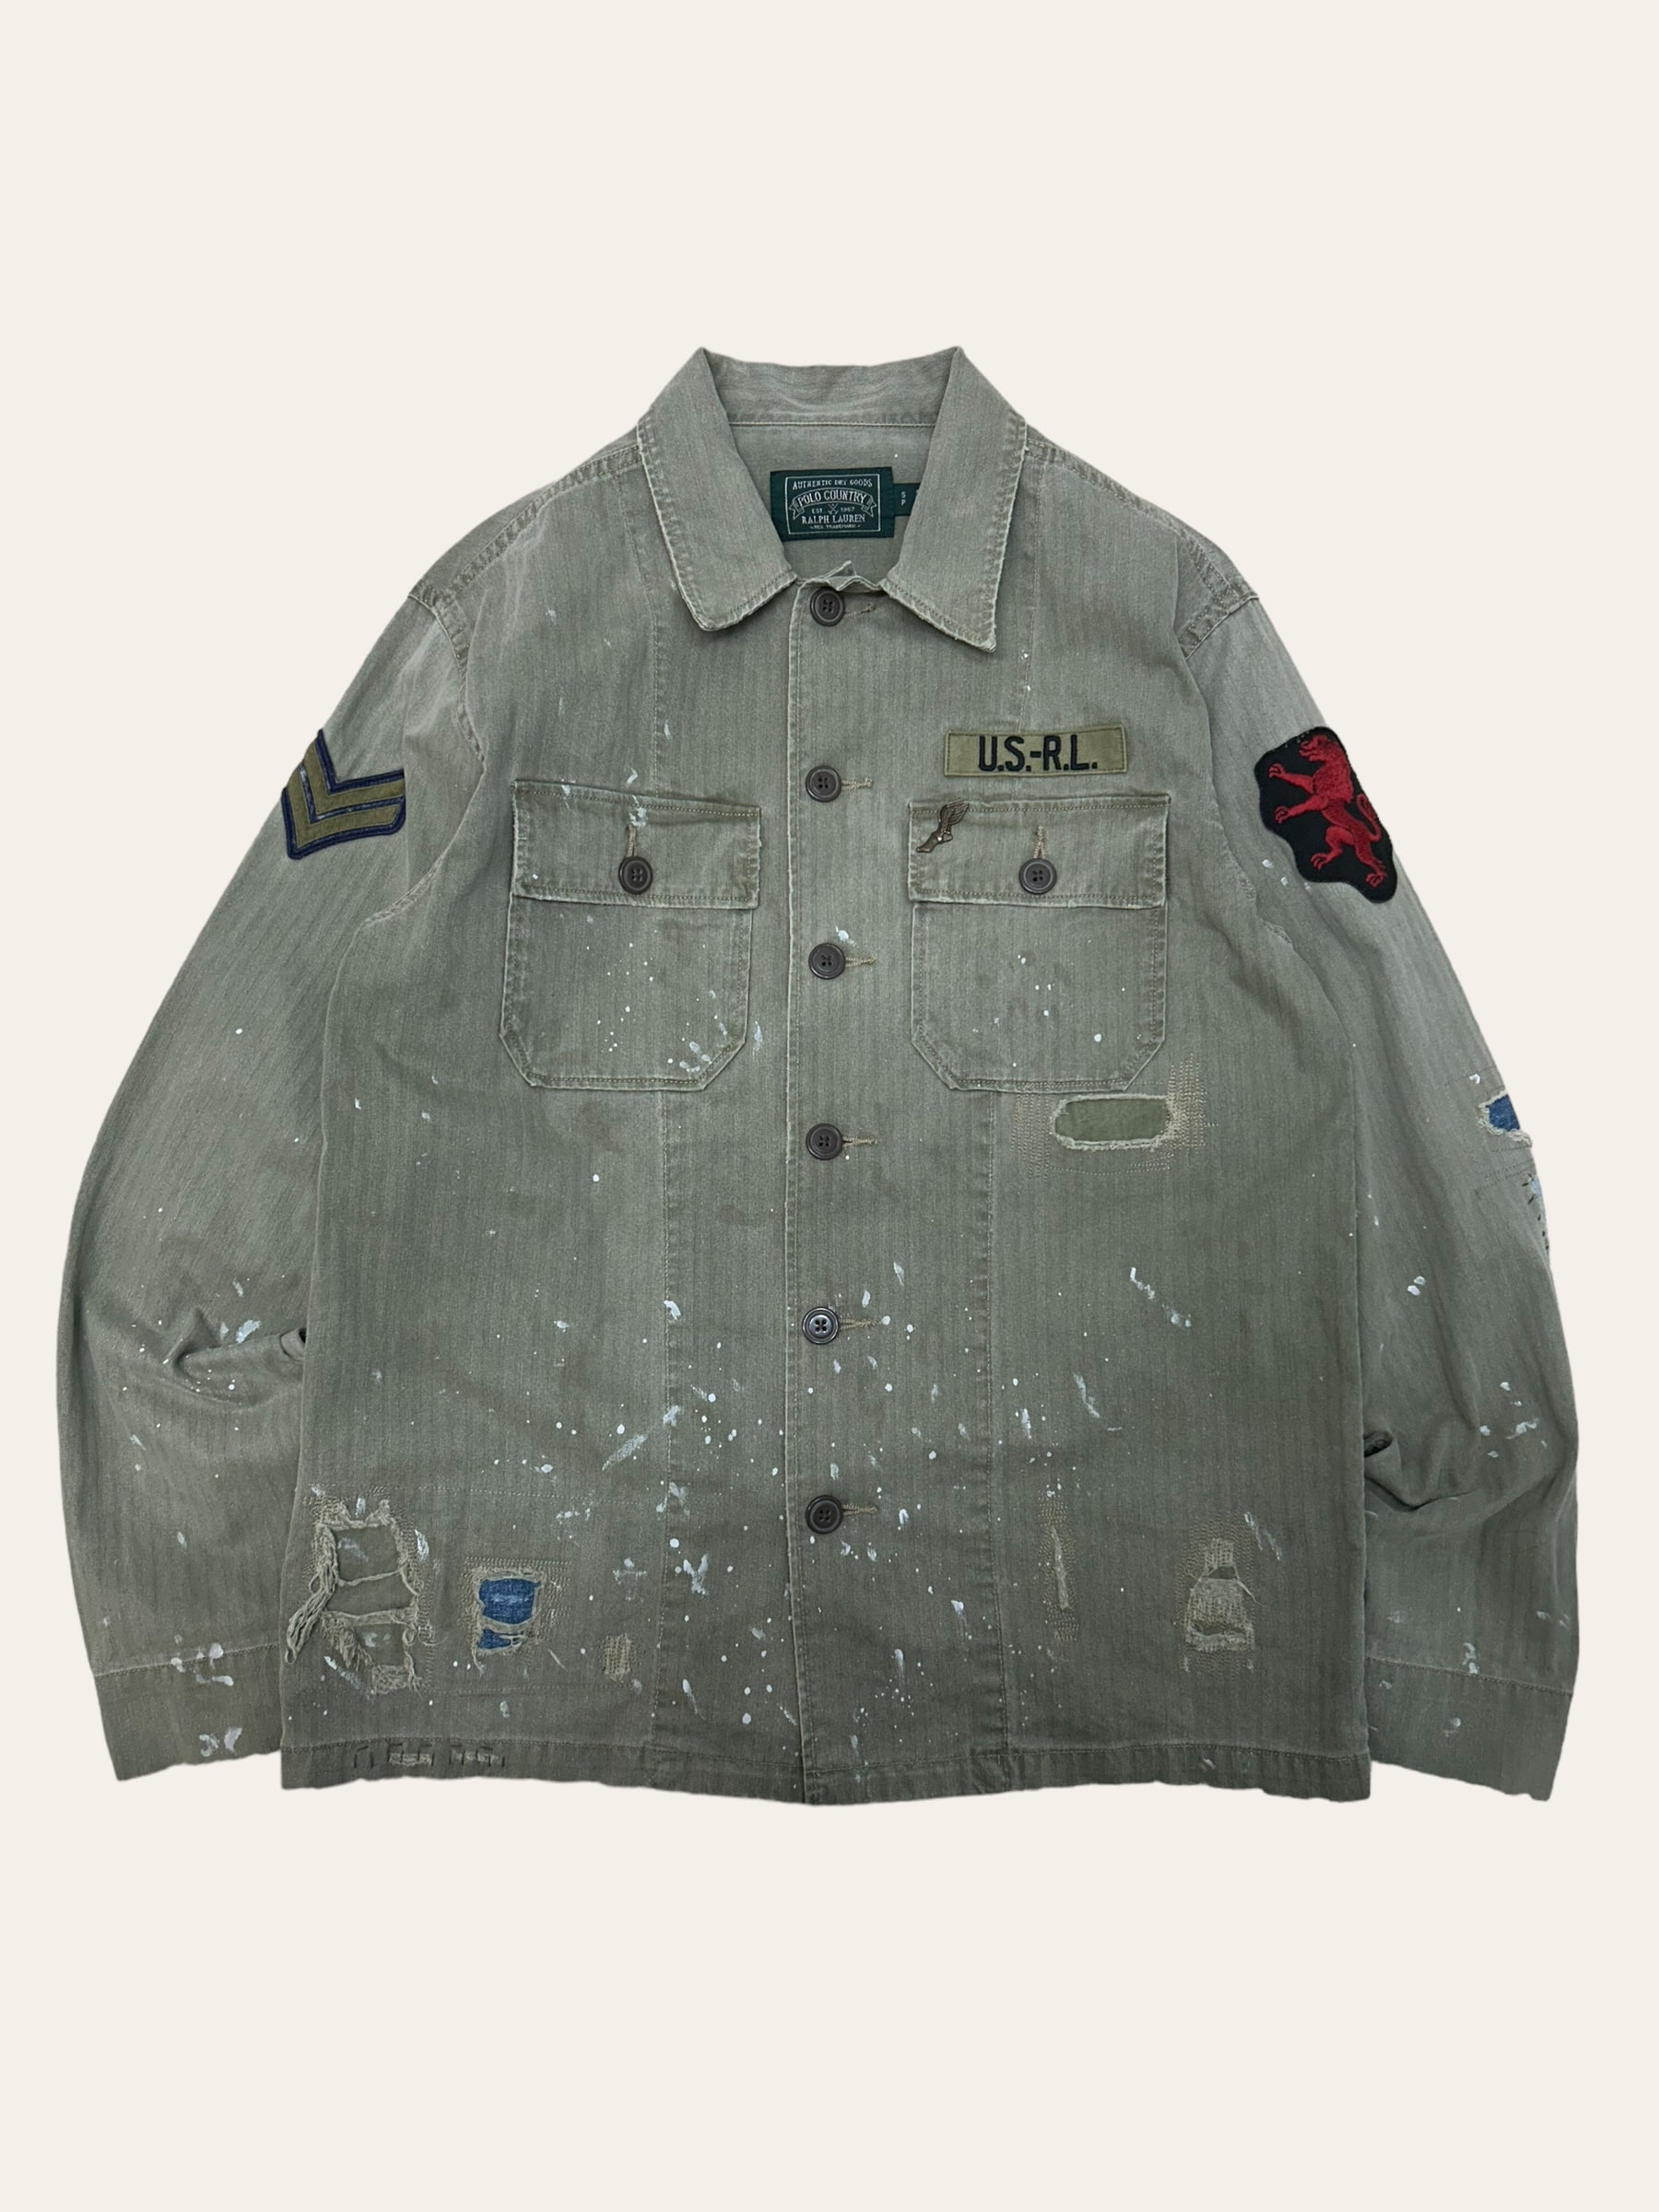 POLO COUNTRY oil paint splatter shirt jacket S